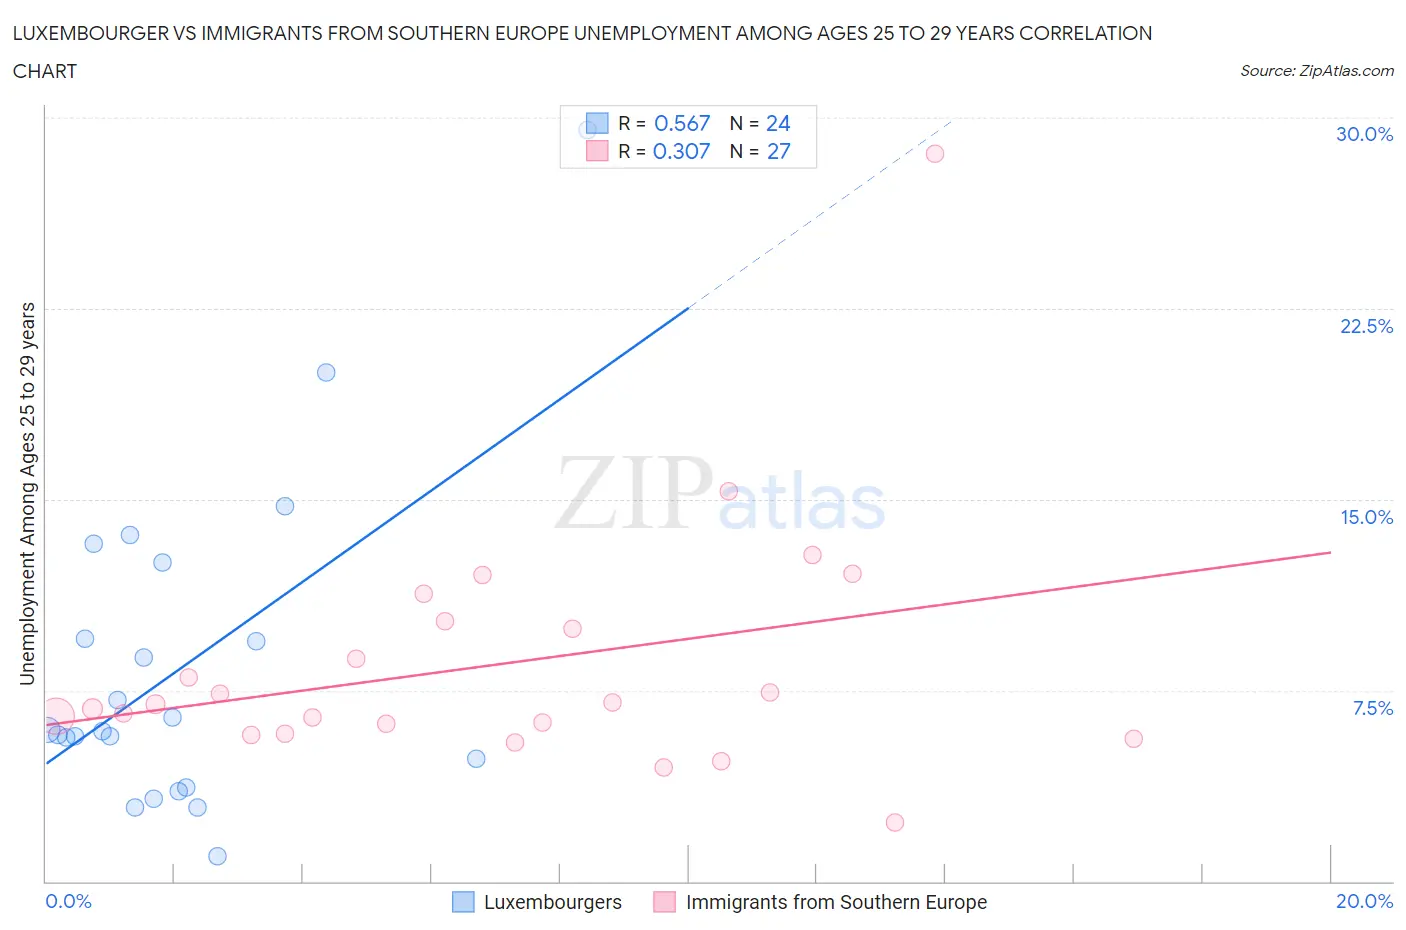 Luxembourger vs Immigrants from Southern Europe Unemployment Among Ages 25 to 29 years